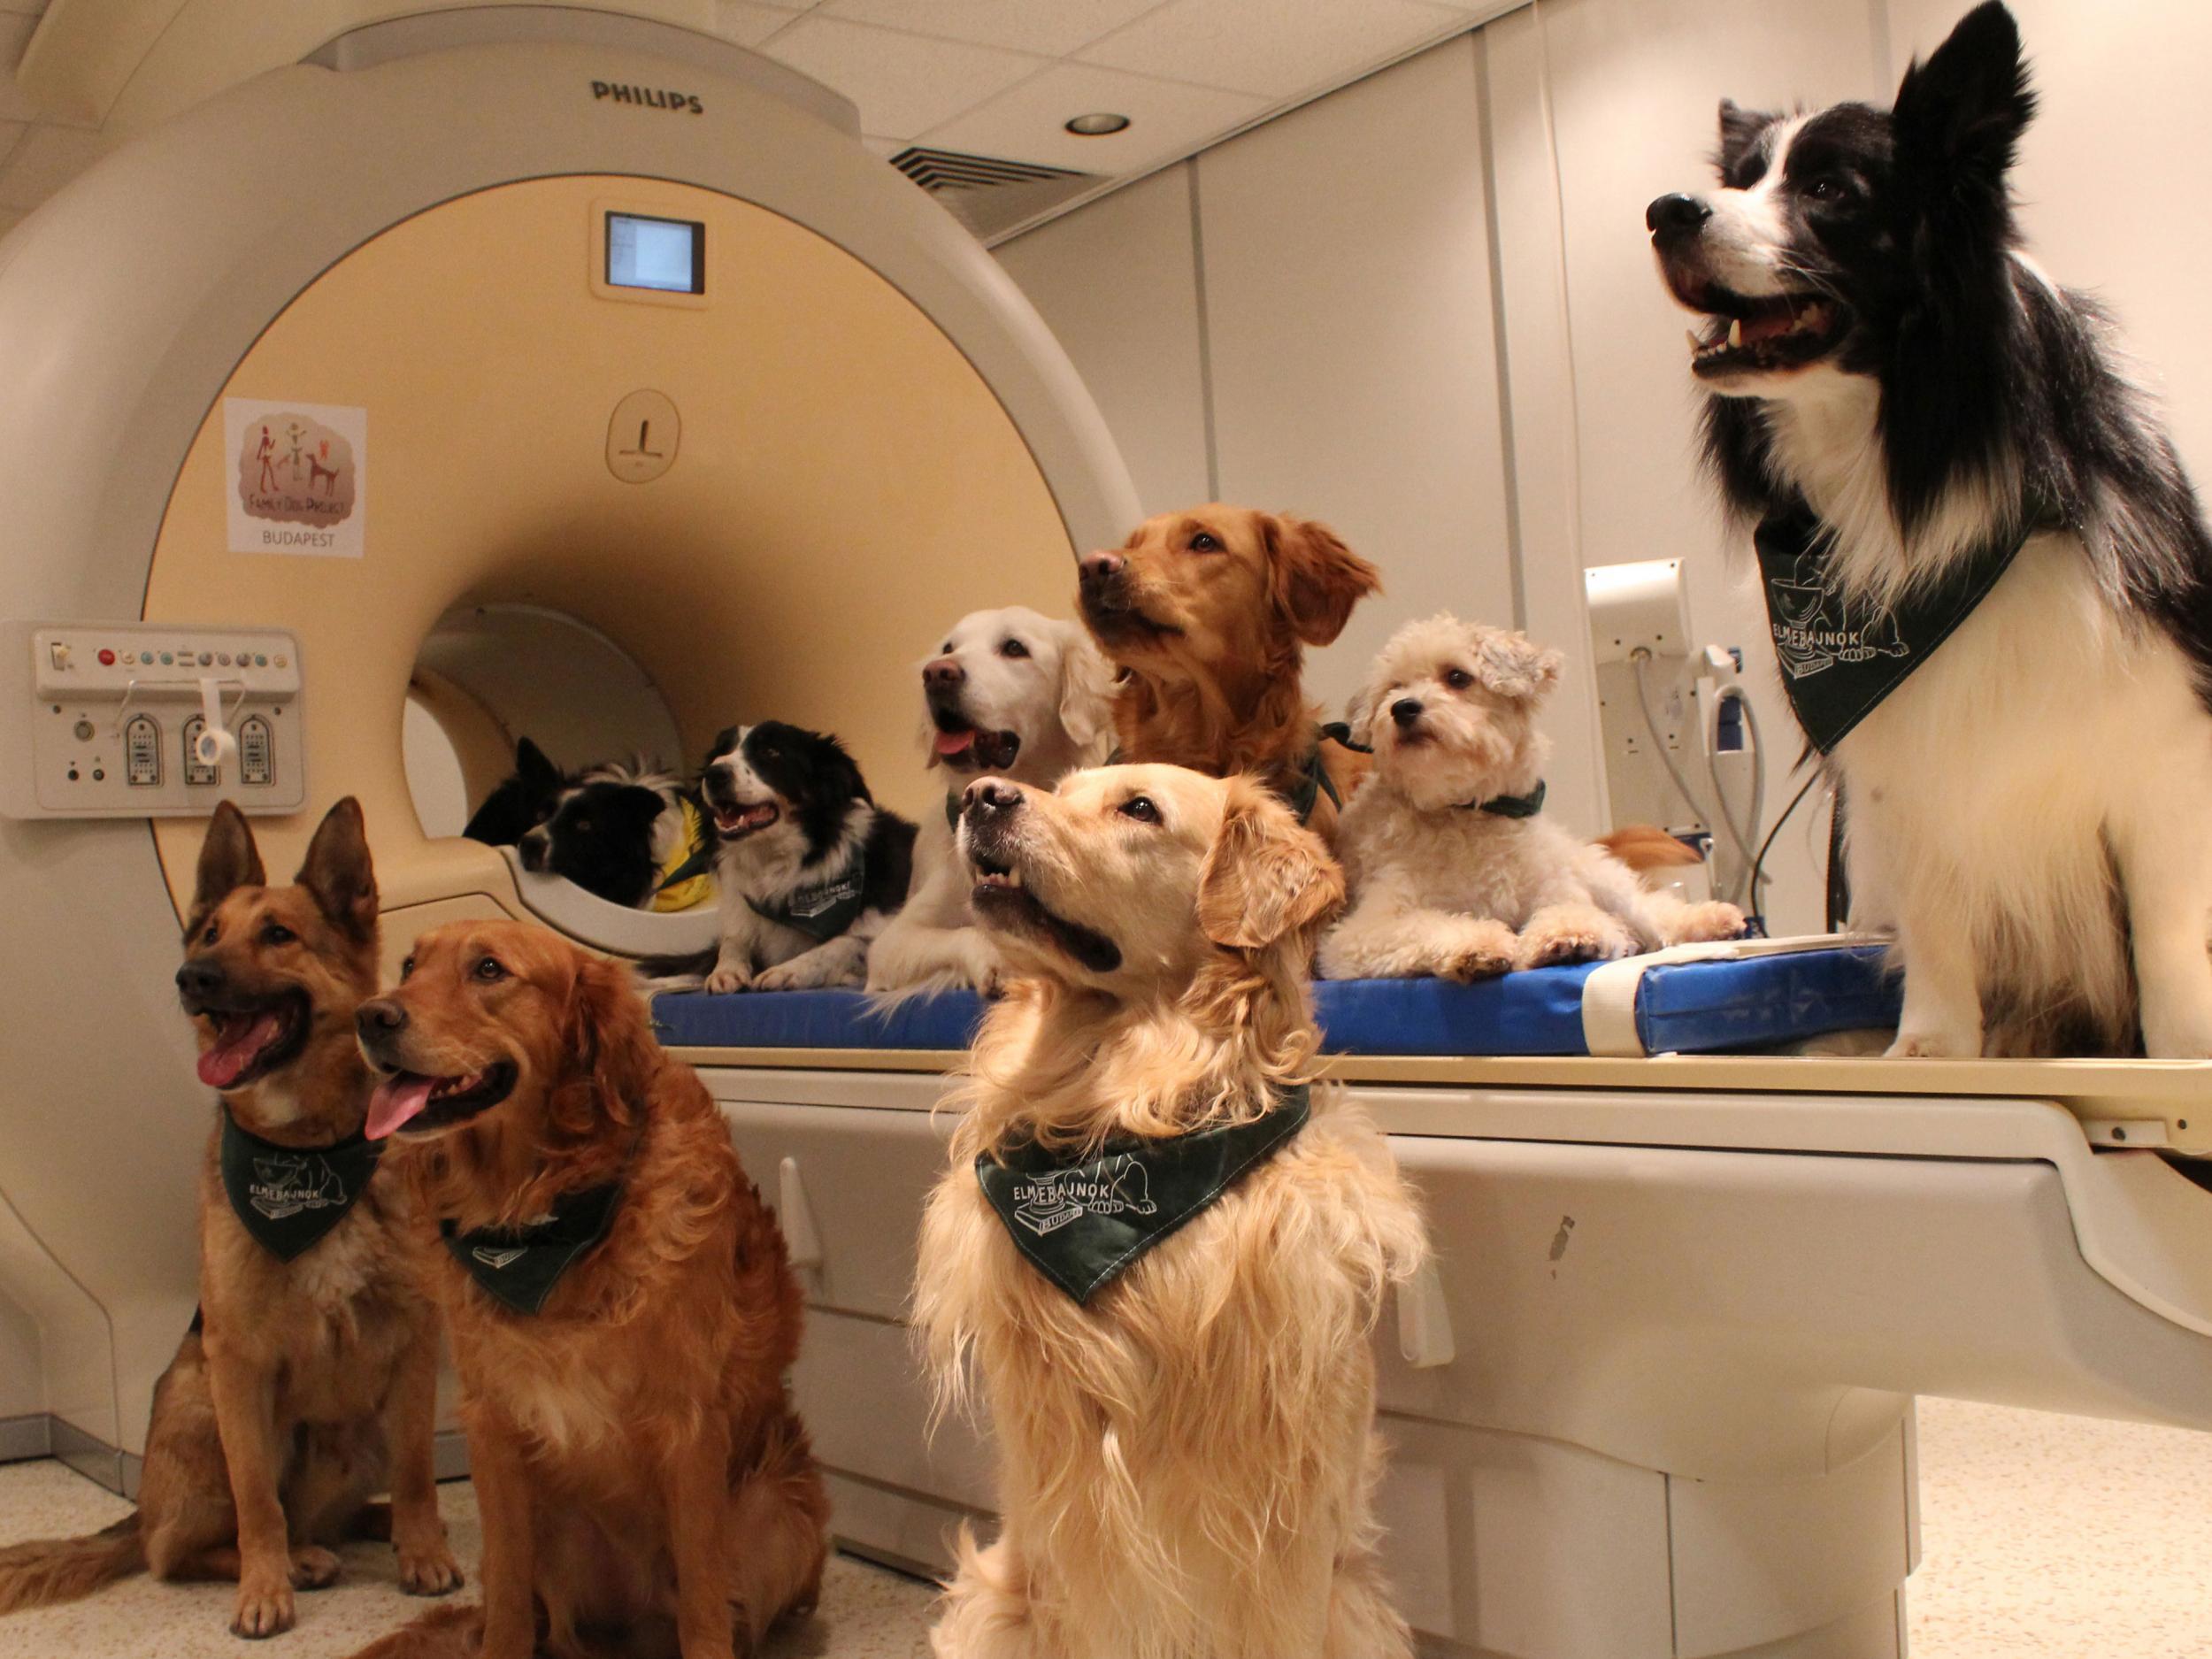 Dogs, seen here around an MRI scanner, appear to having an understanding of some human words